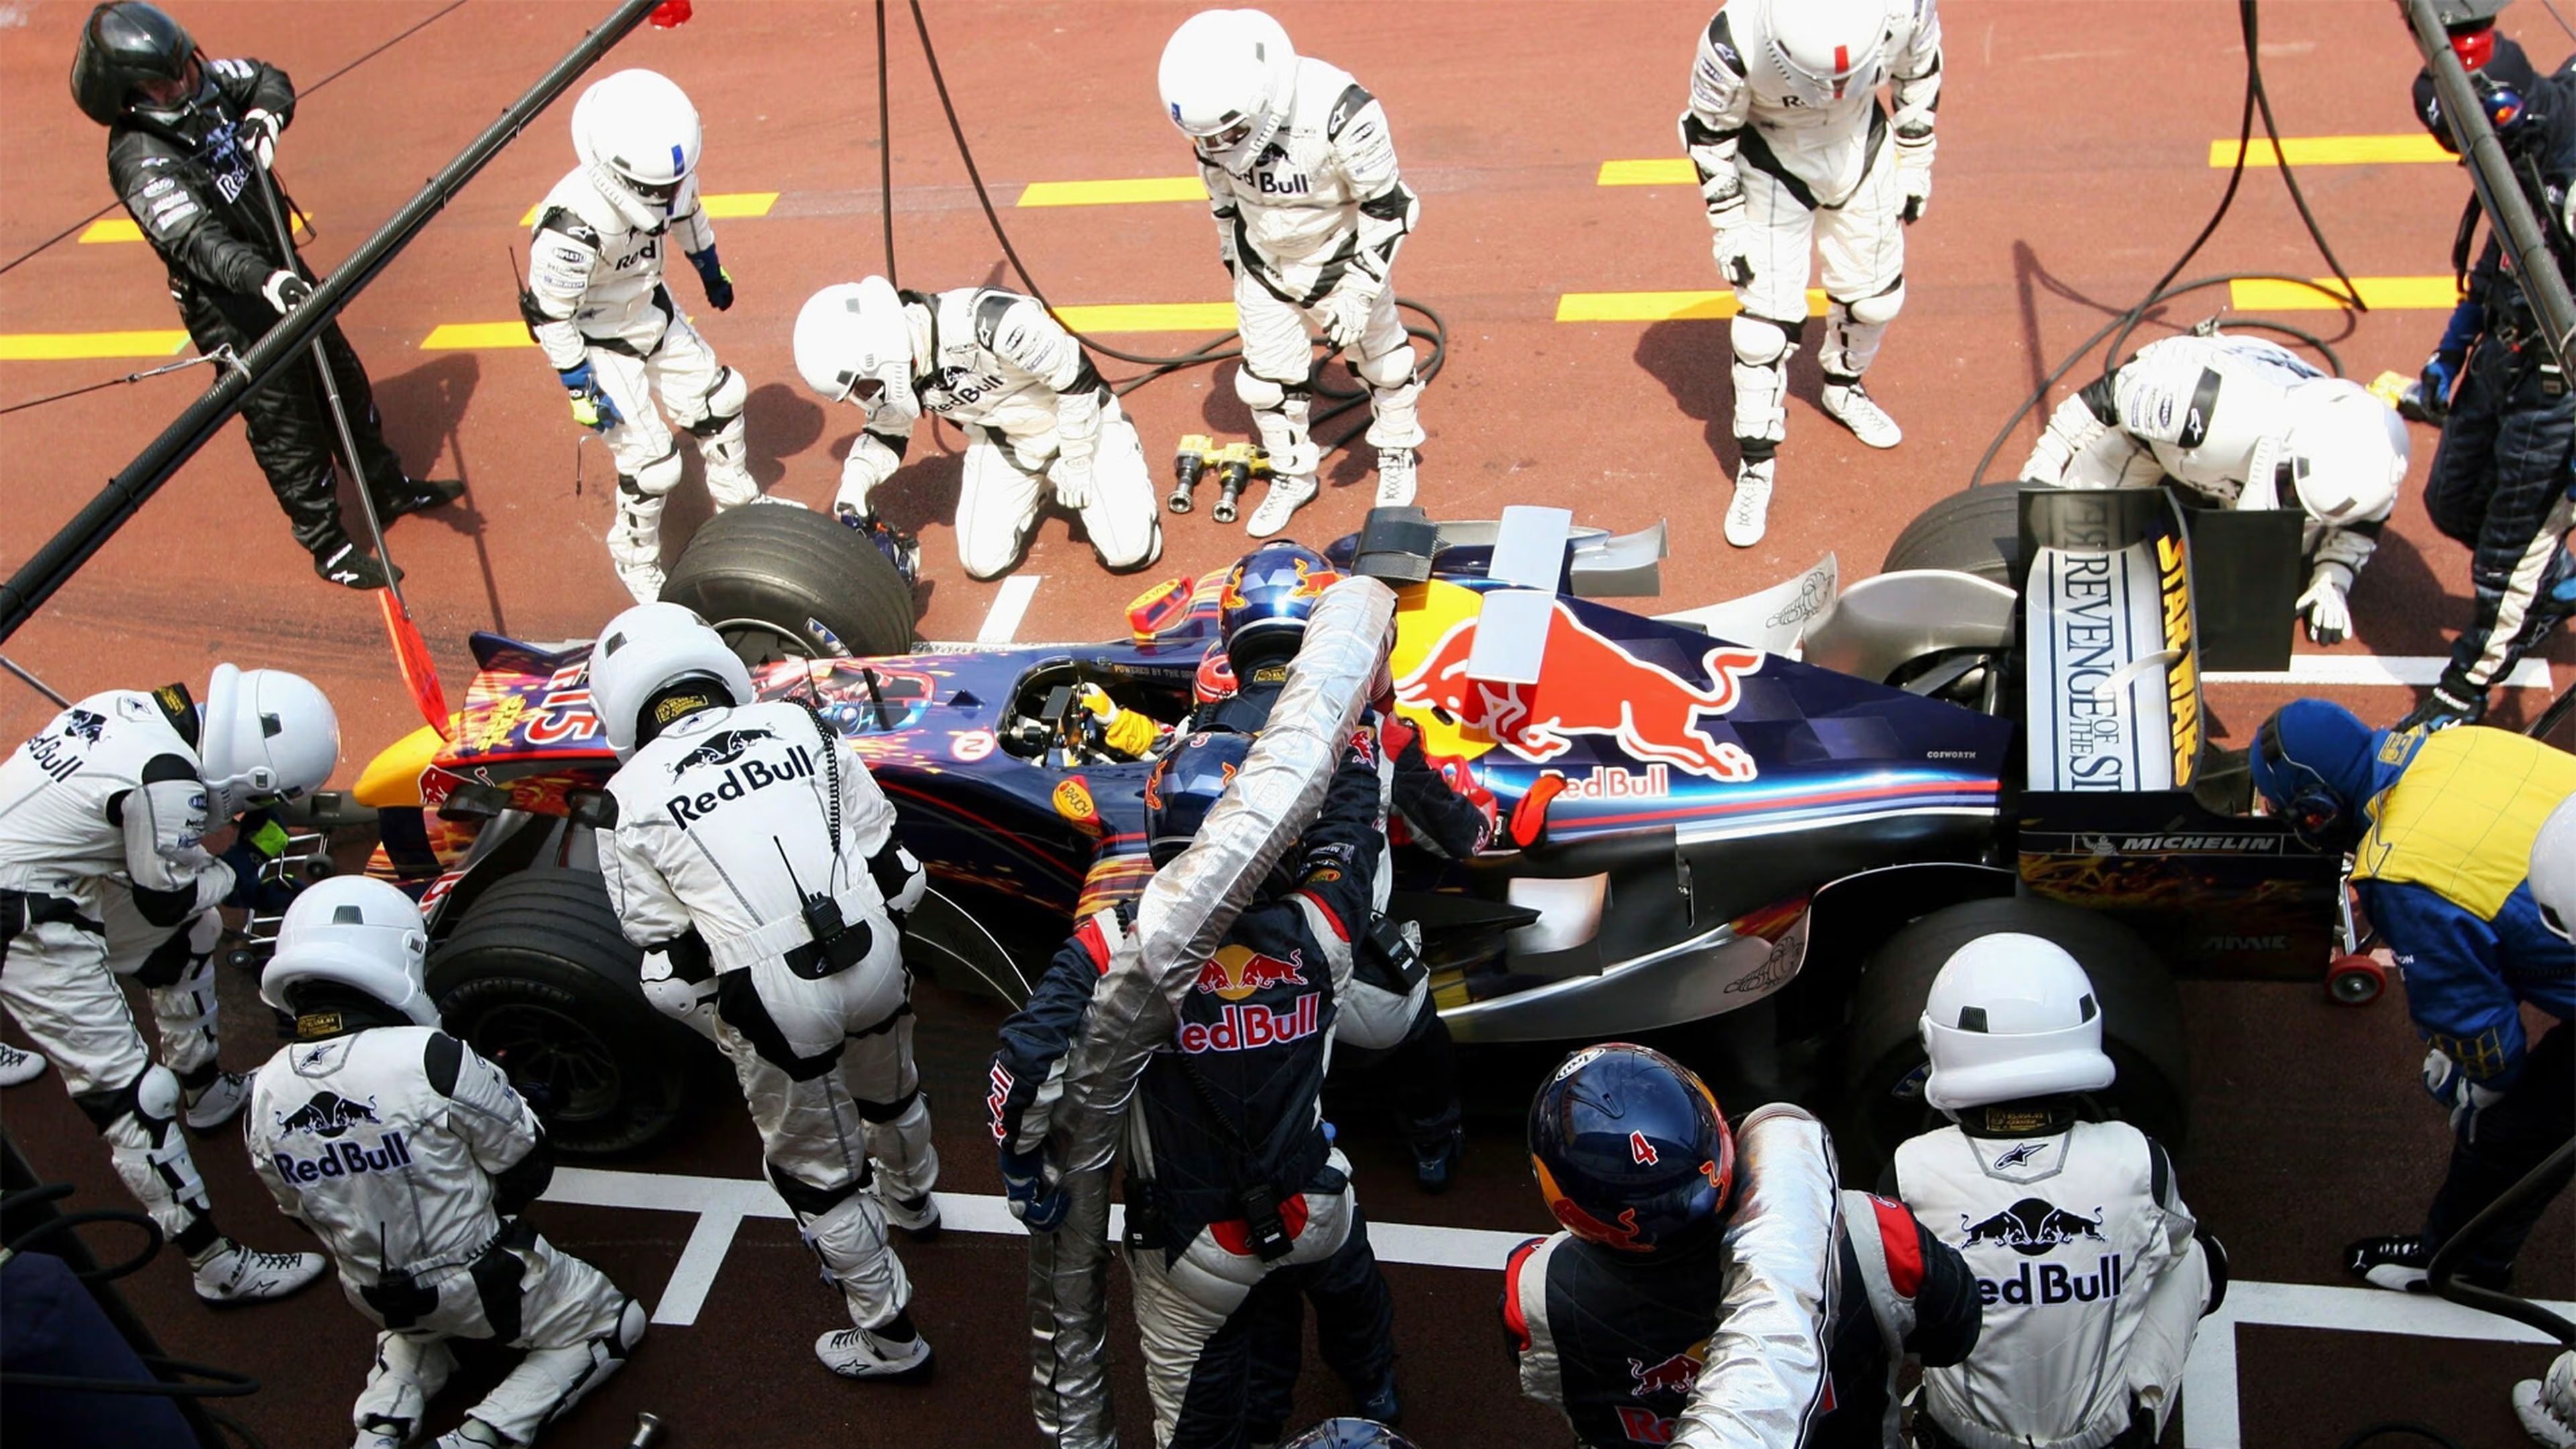 Red Bull and Star Wars